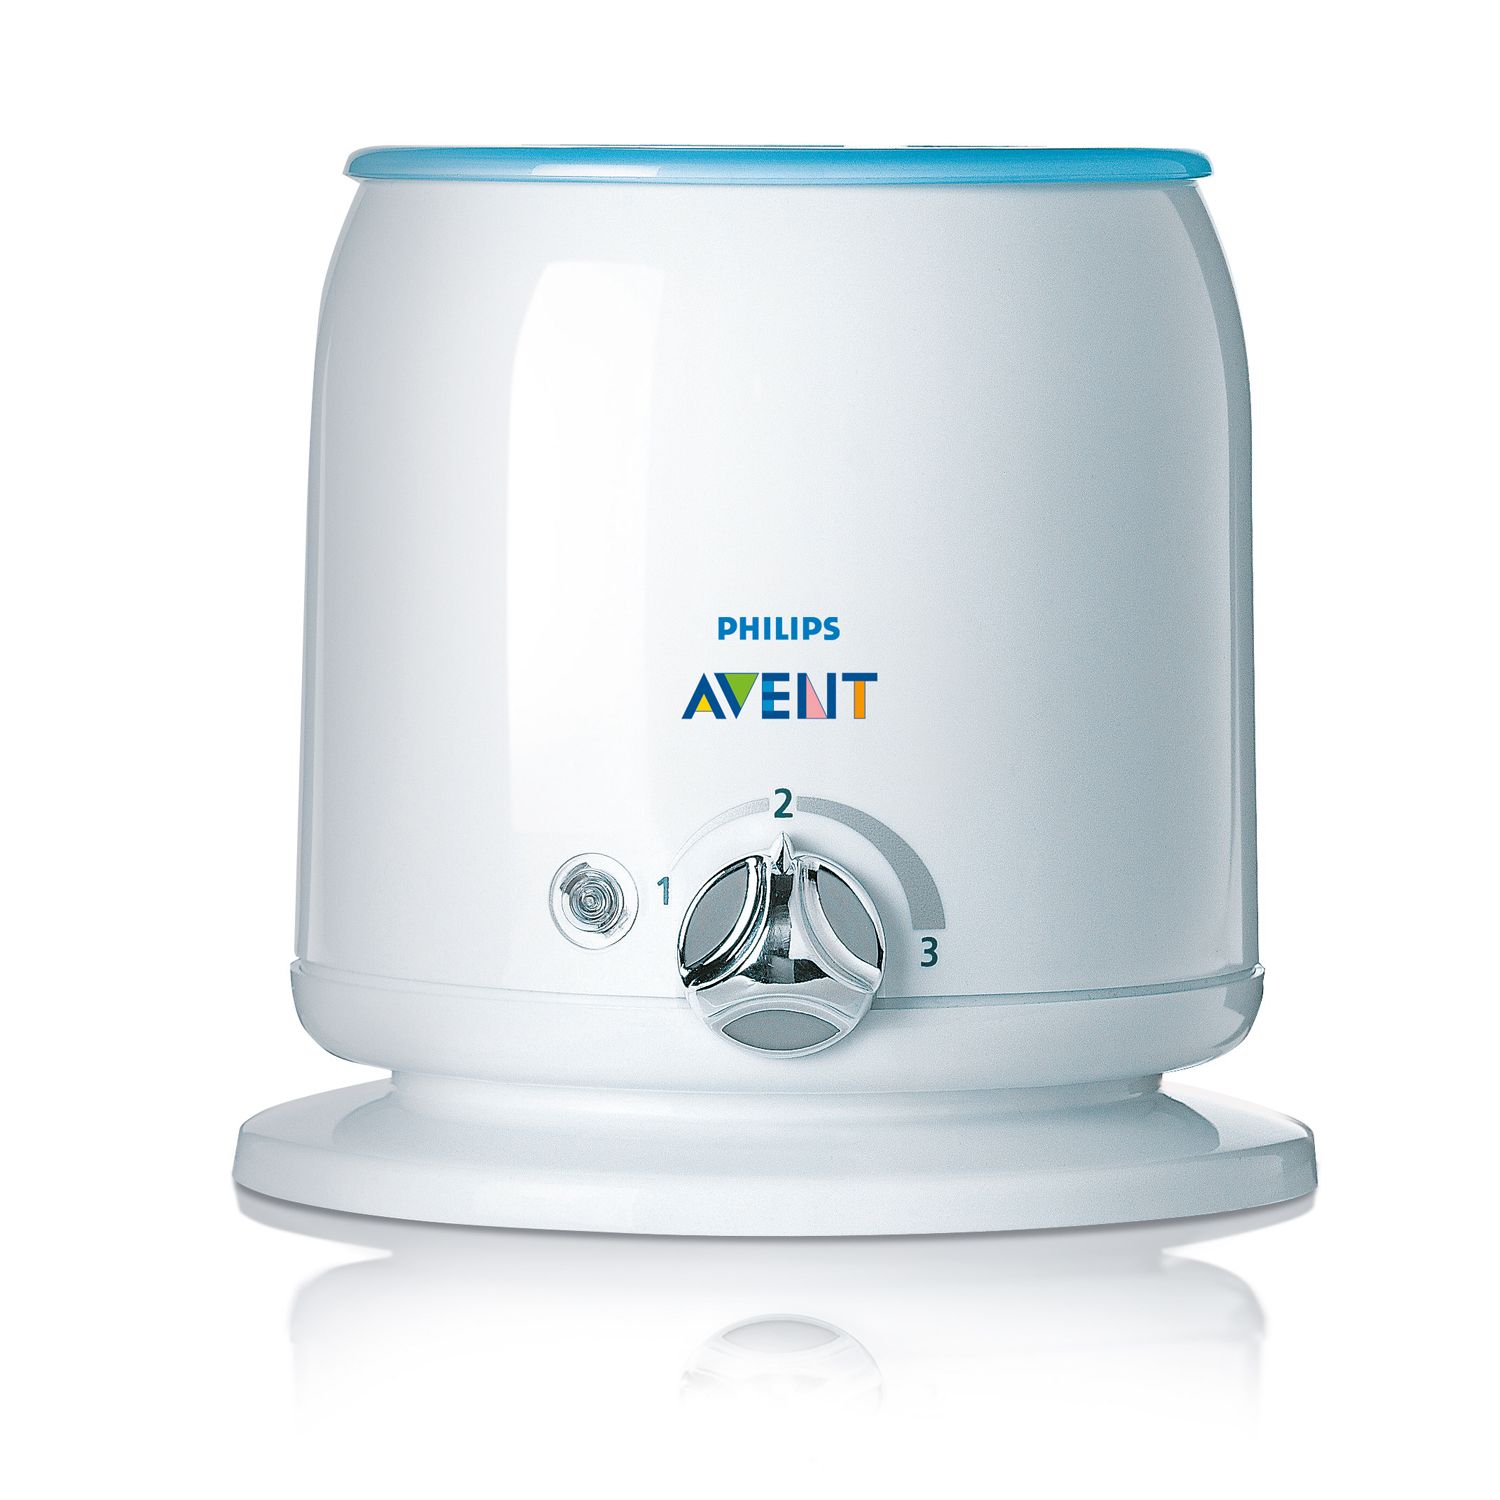 avent baby food warmer